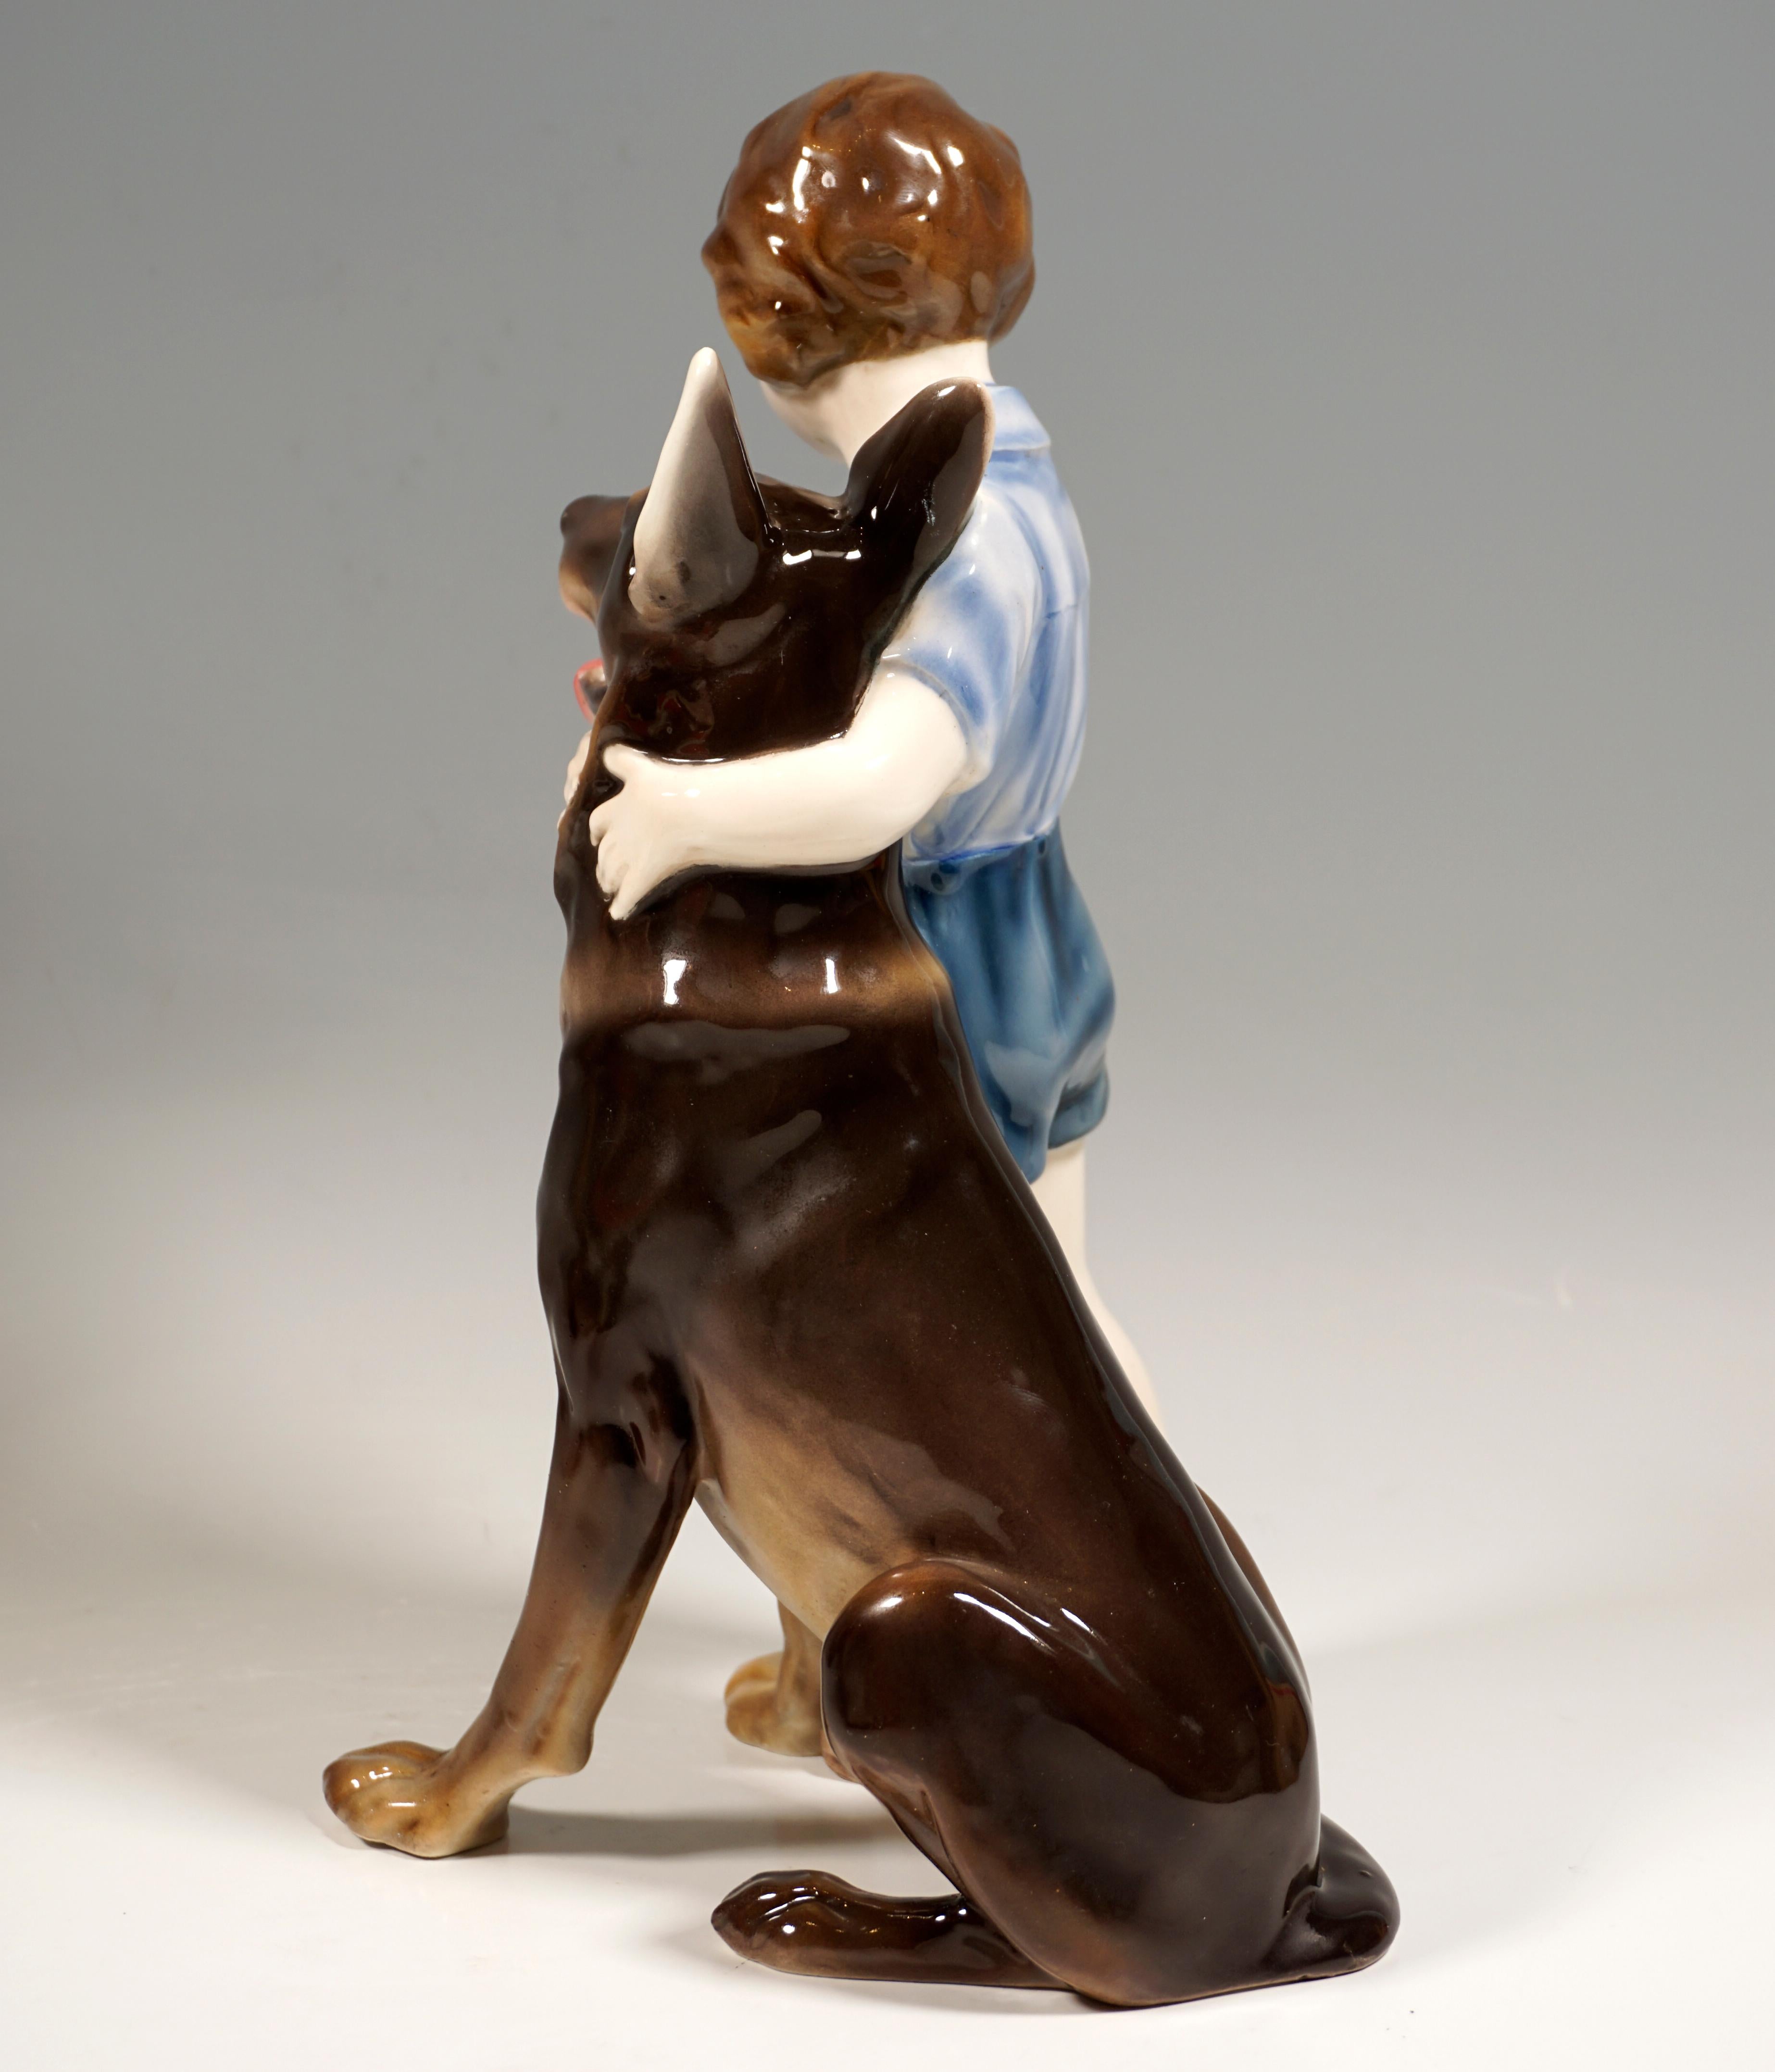 Hand-Crafted Goldscheider Art Deco Group, Girl with Shepherd Dog, Lorenzl and Postl, ca 1930